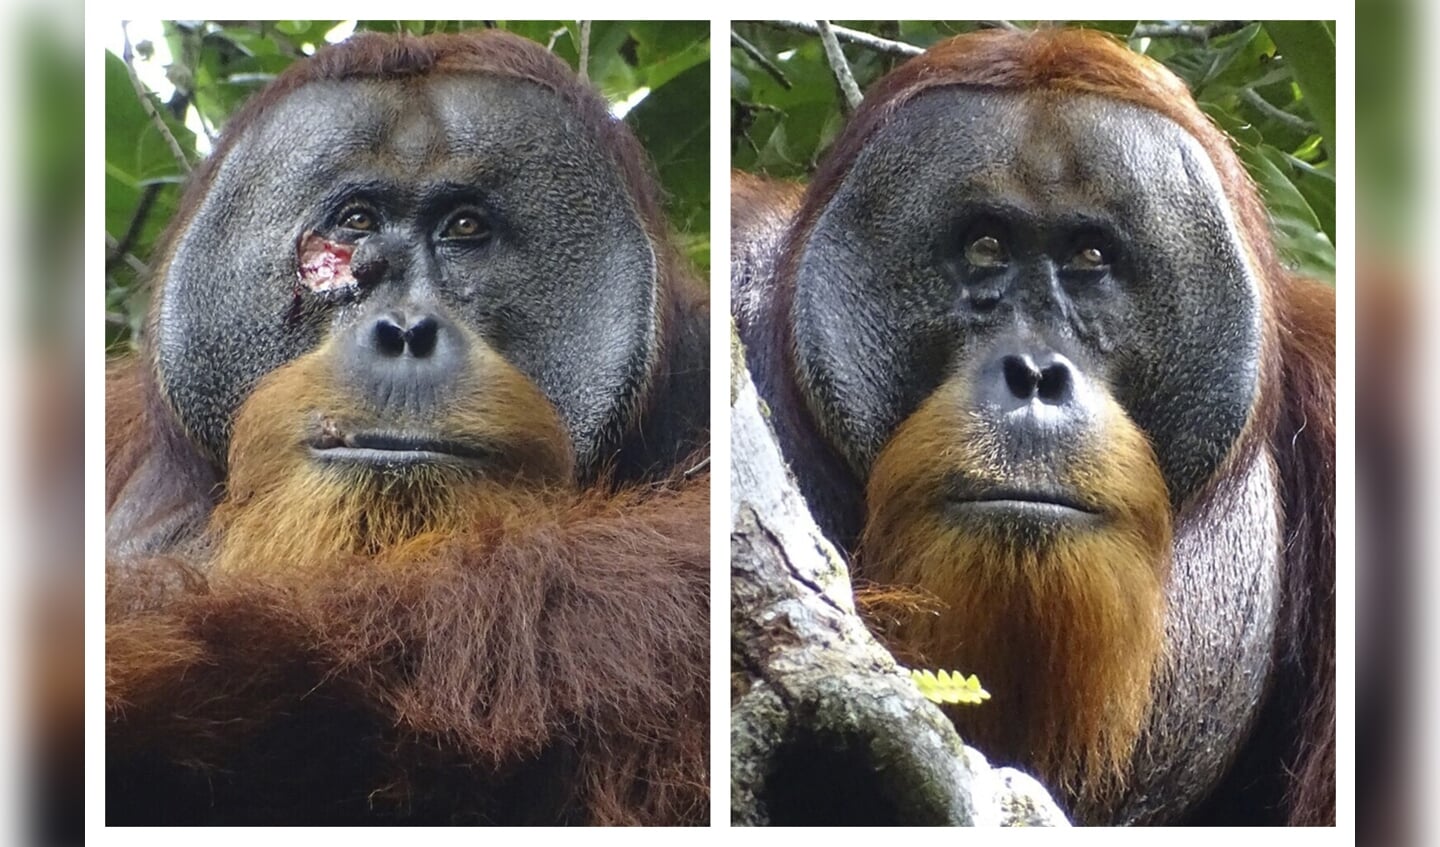 This combination of photos provided by the Suaq foundation shows a facial wound on Rakus, a wild male Sumatran orangutan in Gunung Leuser National Park, Indonesia, on June 23, 2022, two days before he applied chewed leaves from a medicinal plant, left, and on Aug. 25, 2022, after his facial wound was barely visible. (Armas, Safruddin/Suaq foundation via AP)